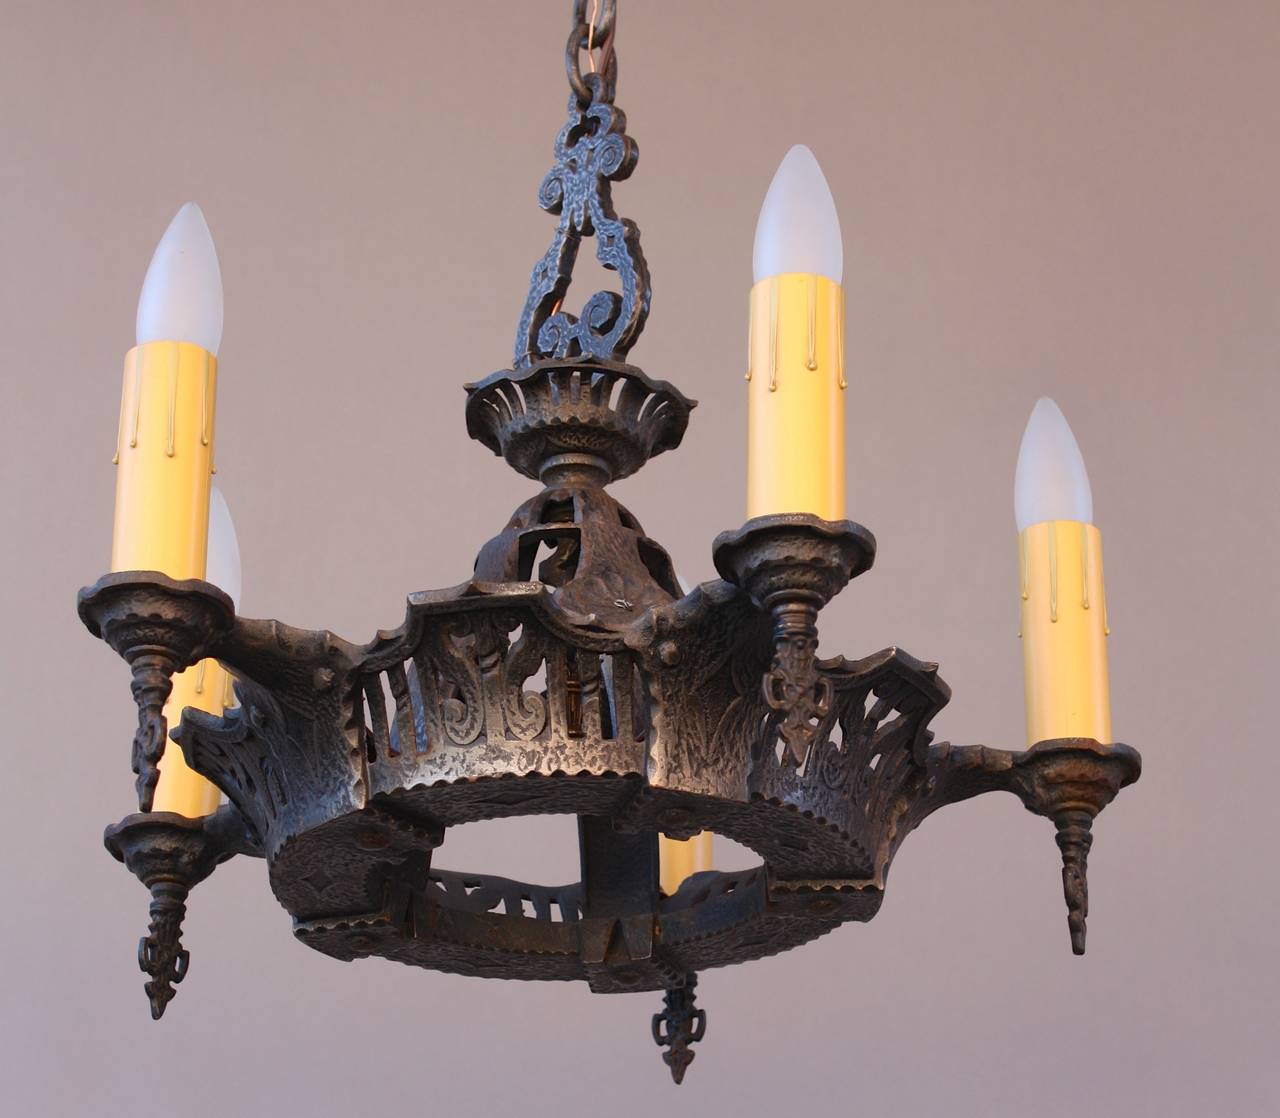 Small-scale 1920s iron chandelier hard to find drop. The body of the fixture is 14.75